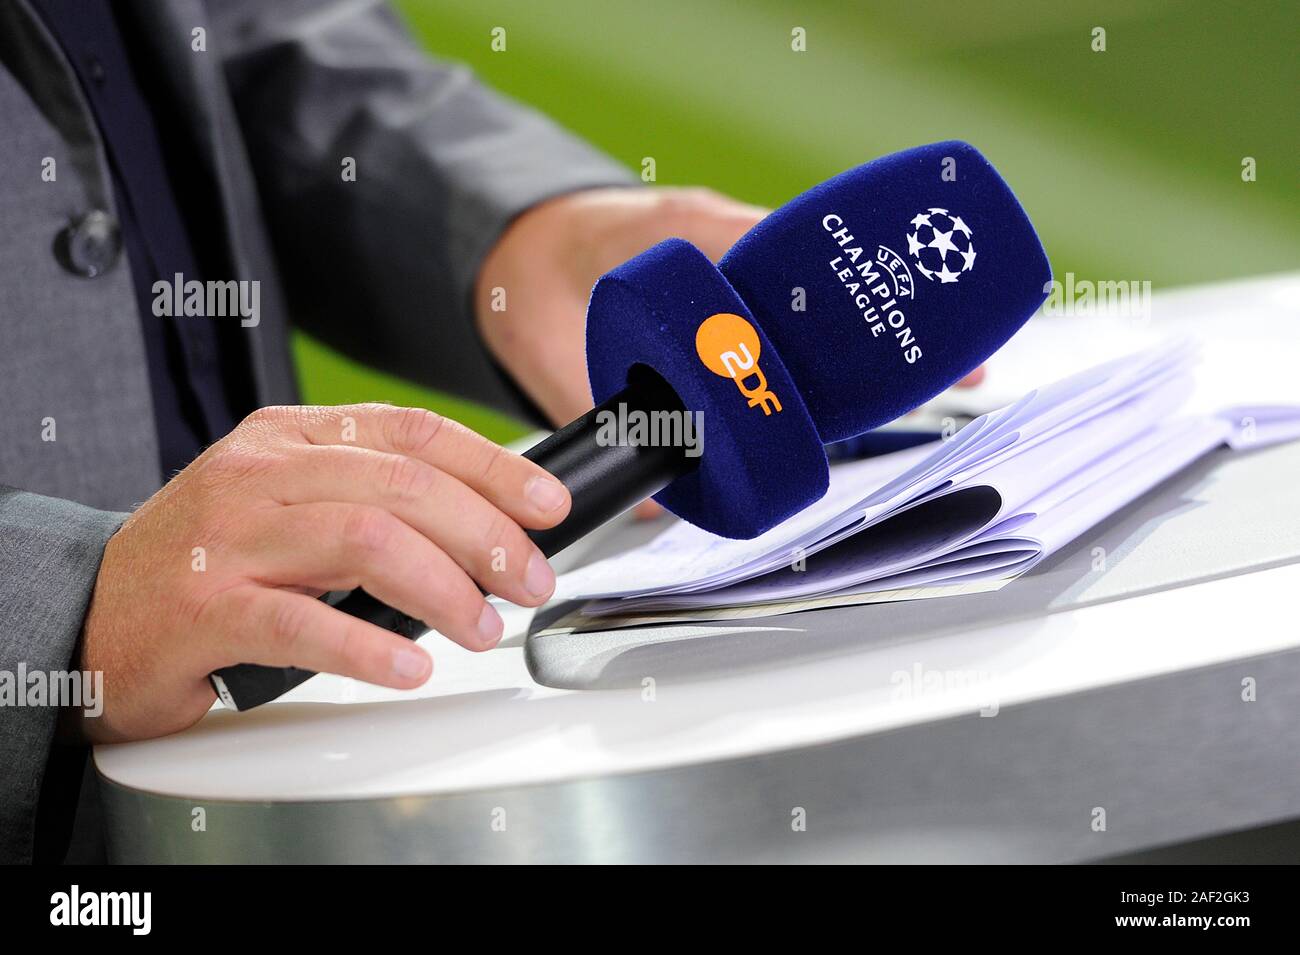 Zdf Microphone High Resolution Stock Photography and Images - Alamy